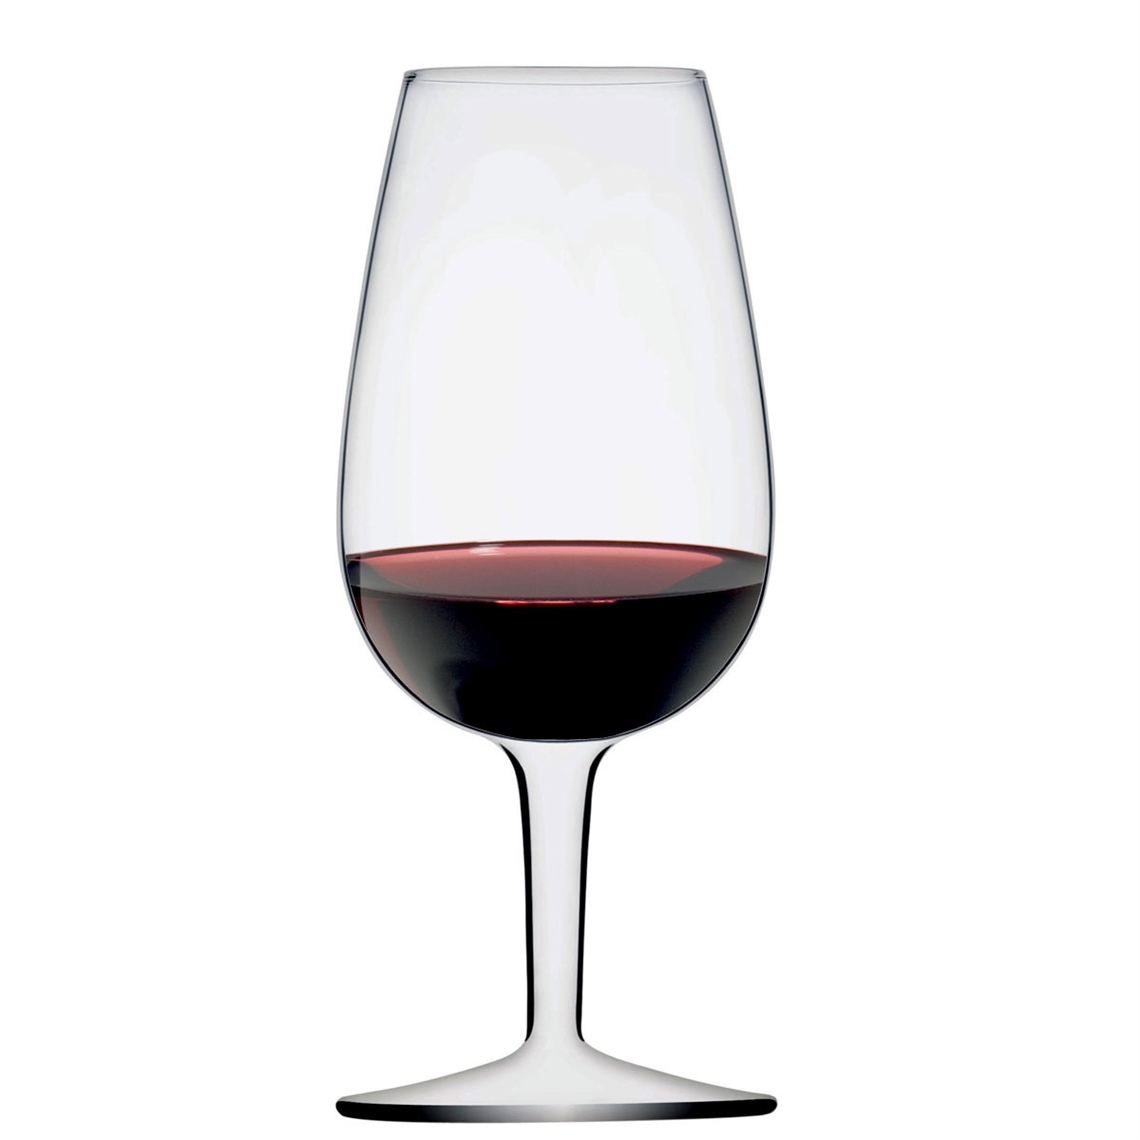 View more wine / spirit education aromas from our Wine Tasting Glasses range